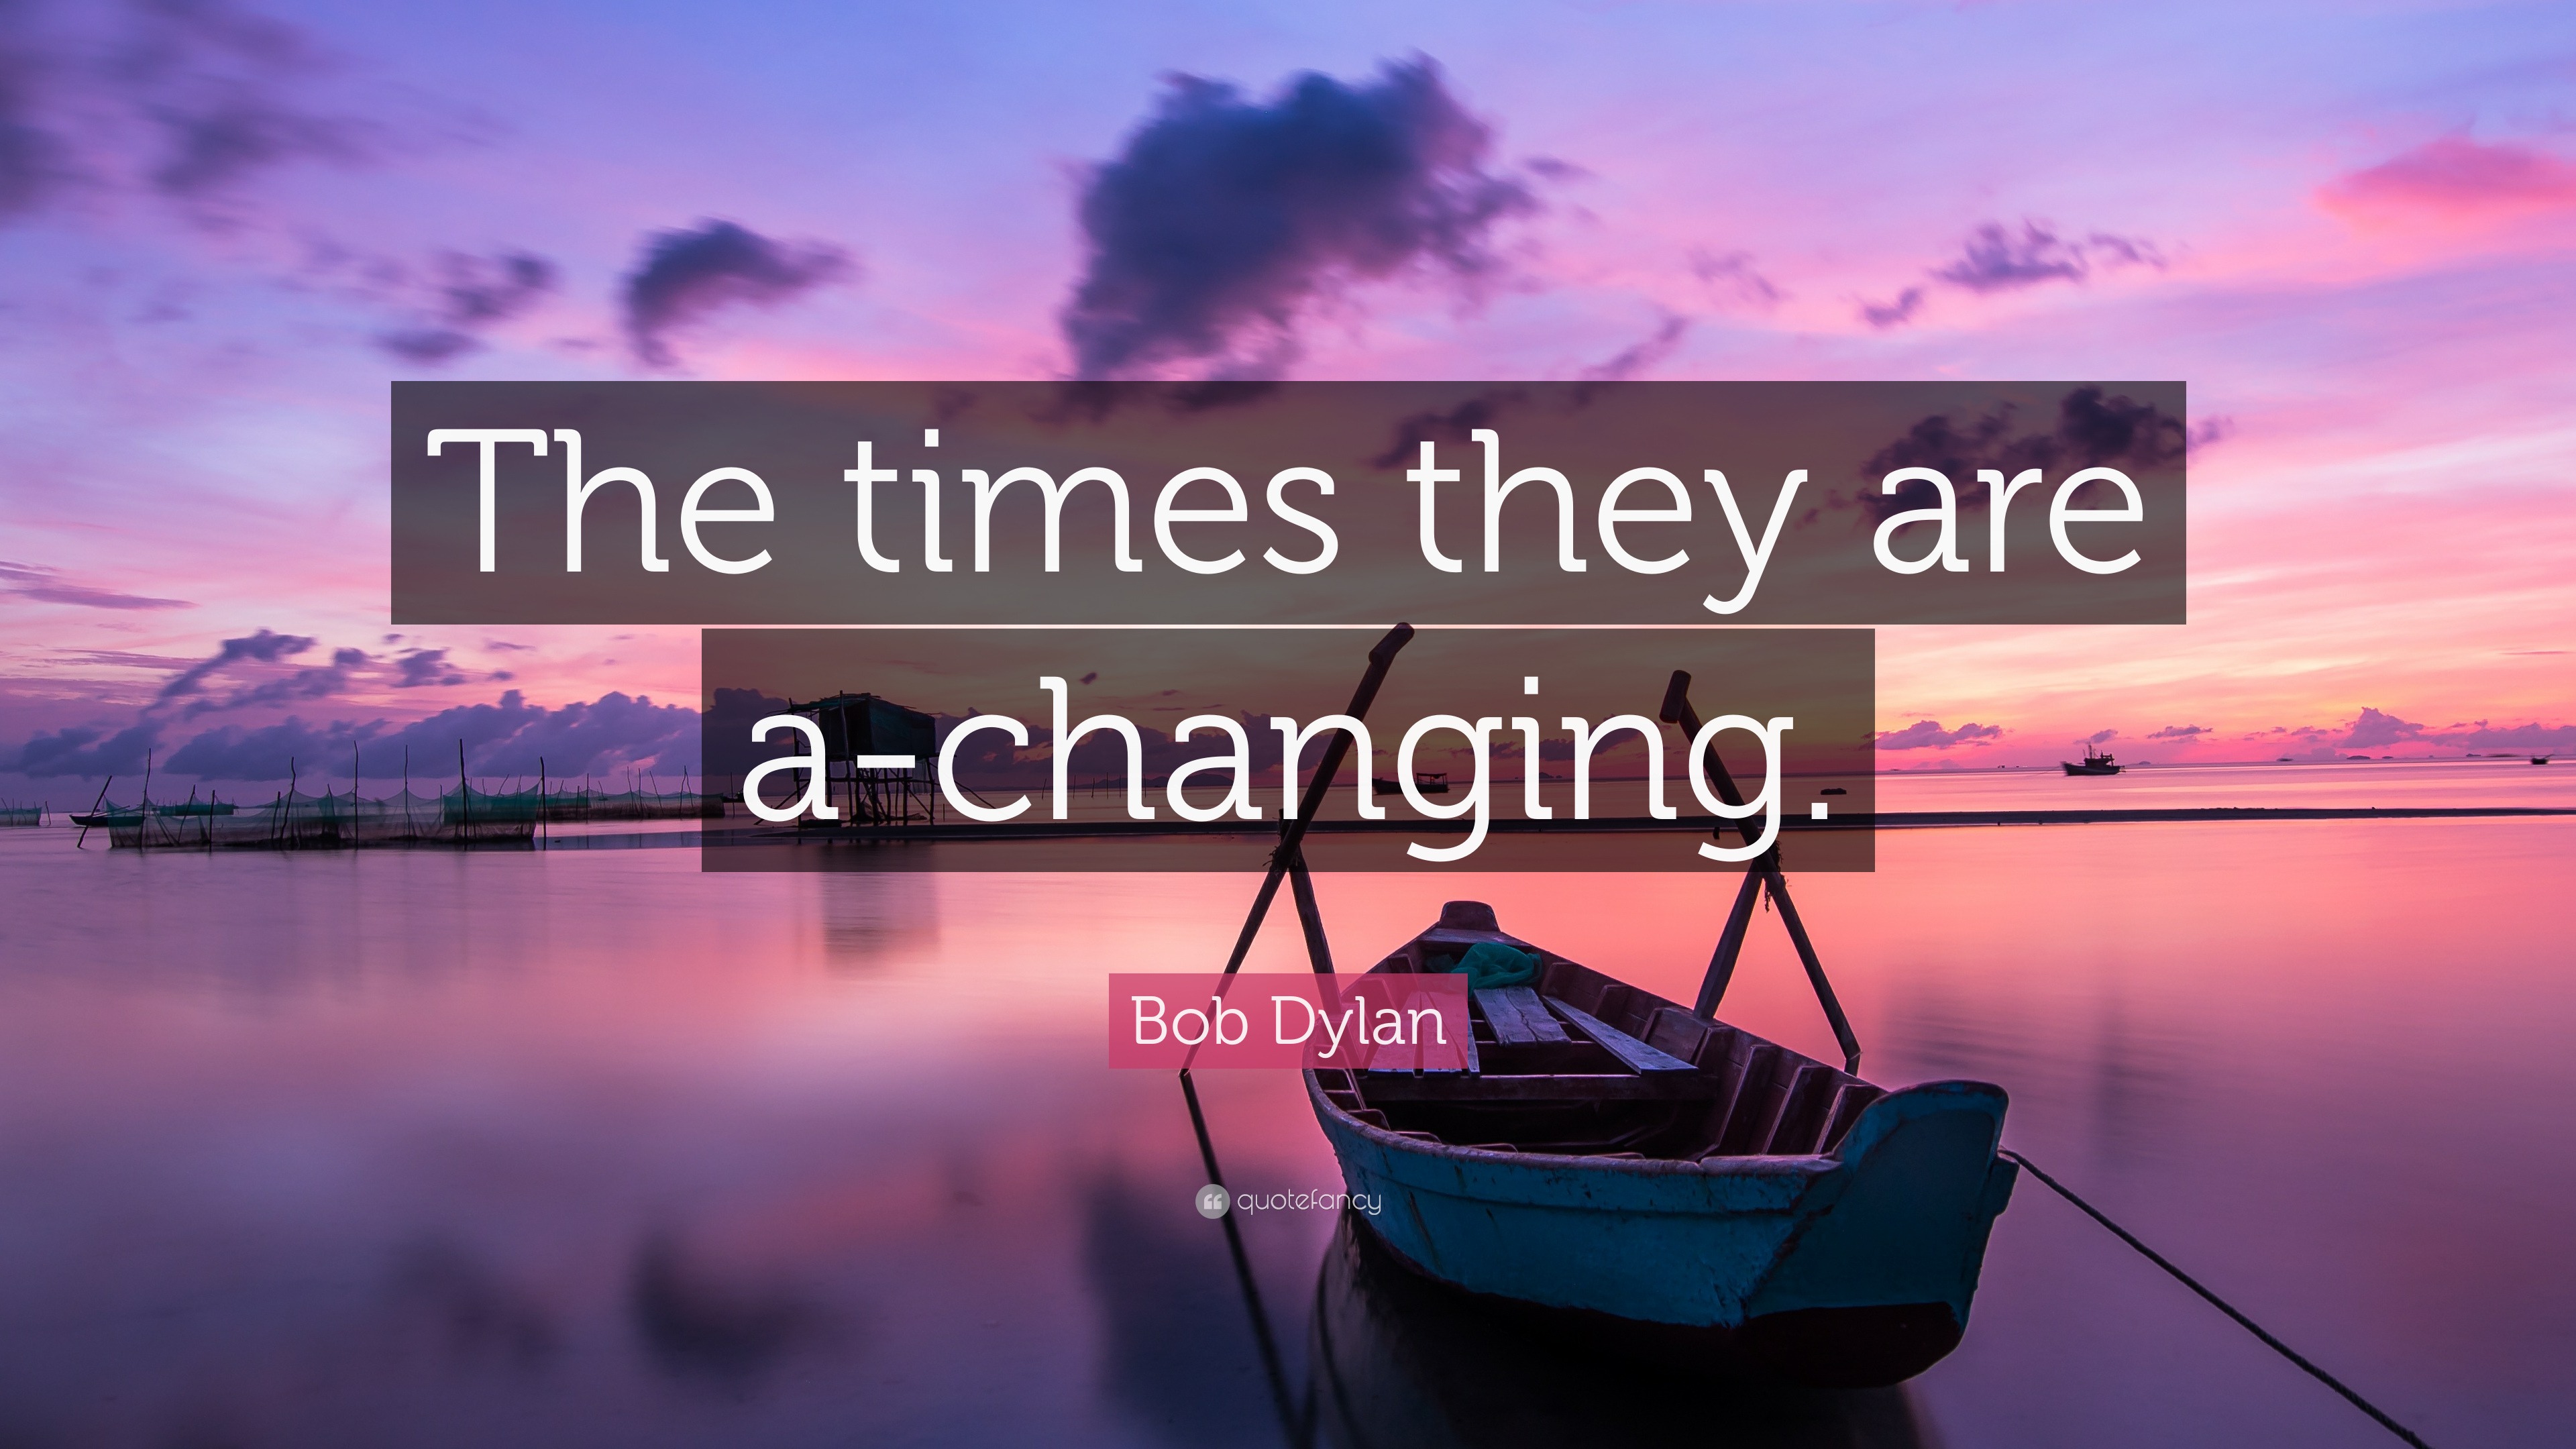 A boat on a serene calm lake during a sunset with the bob dylan quote "The times they are a-changing" overlaid.  The image is taken from Quotefancy